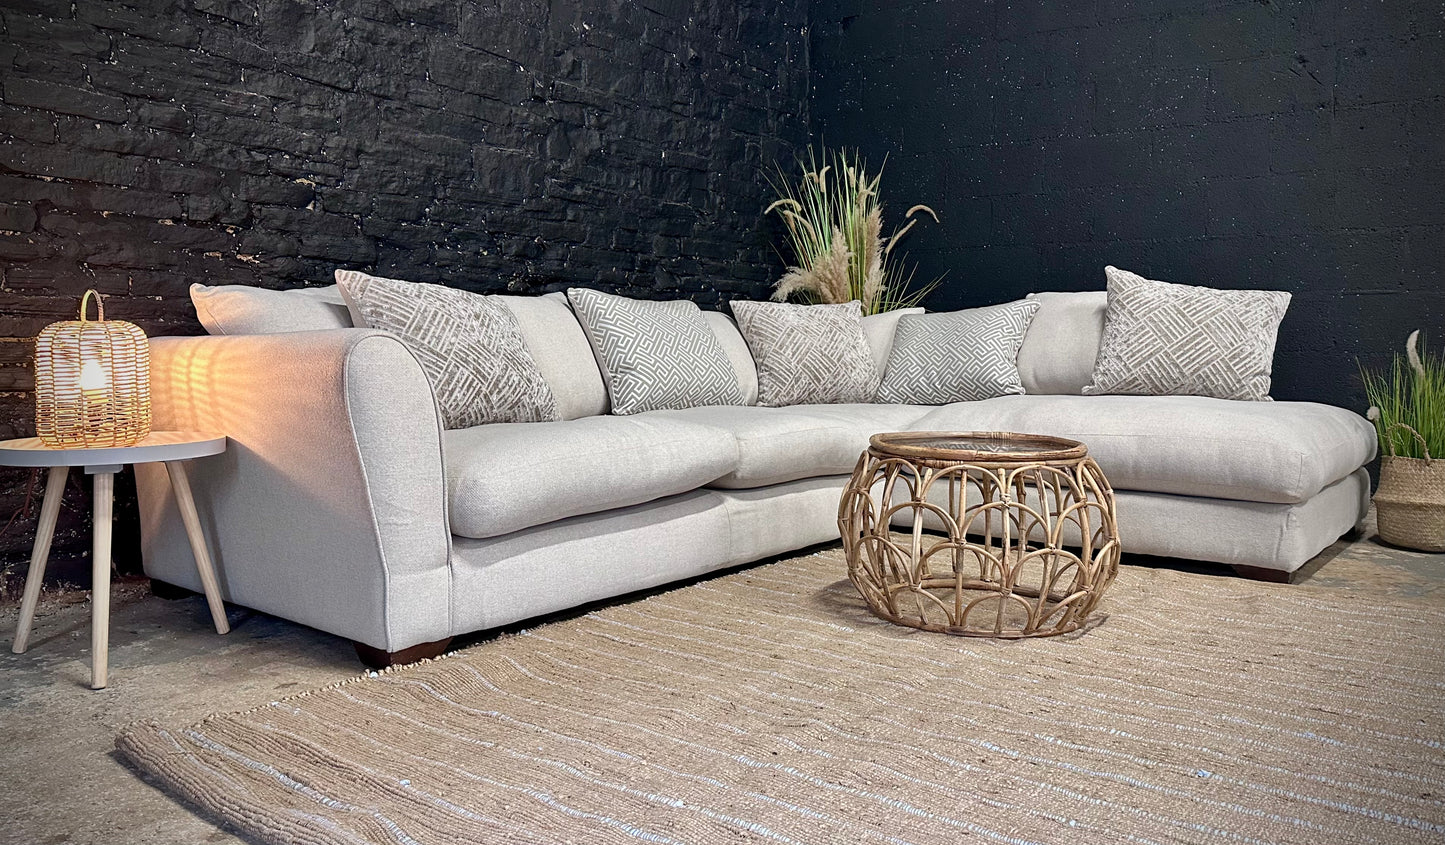 DFS Salcombe Large Sectional neutral light cream Fabric Right Hand Facing Corner Chaise Sofa

RRP-£3219 OUR PRICE £749